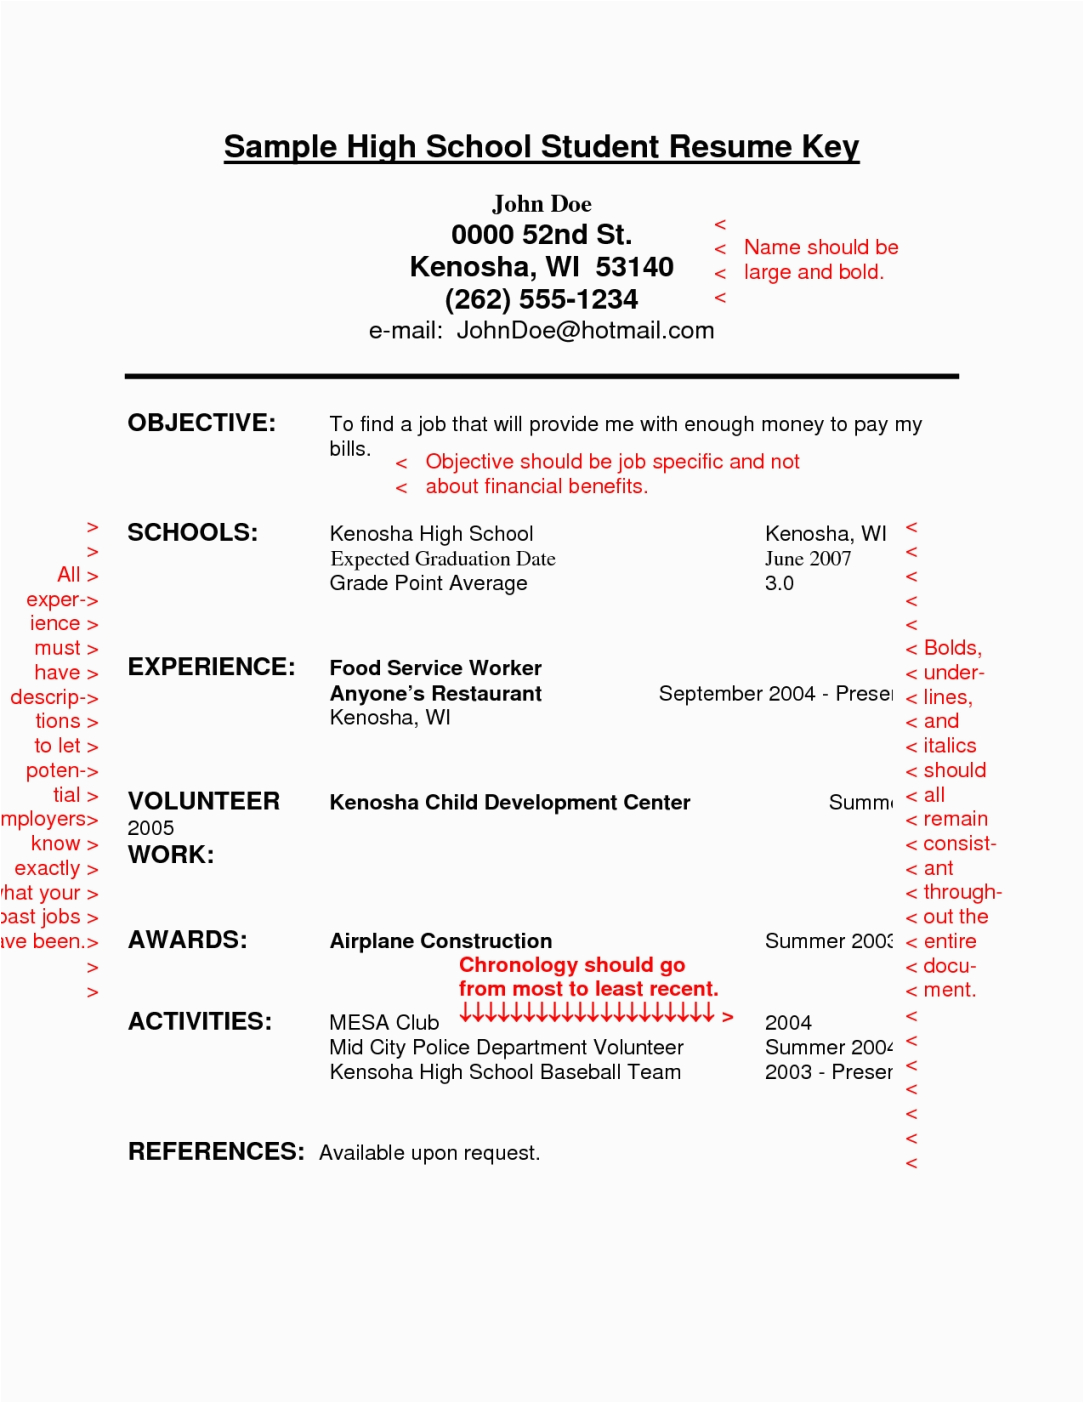 College Resume Template for High School Seniors High School Student Resume Examples